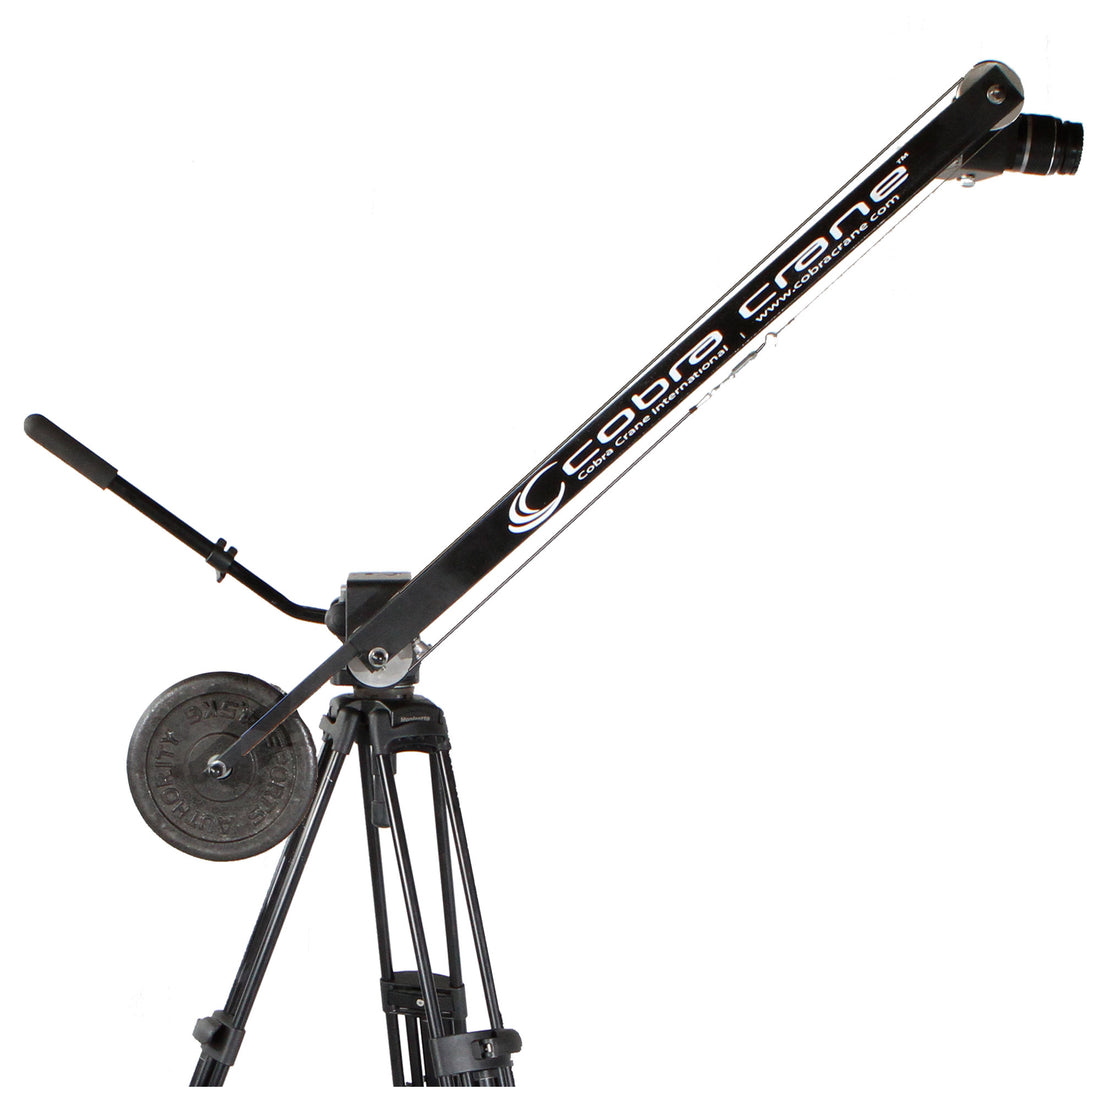 What's the best camera jib for DSLRs